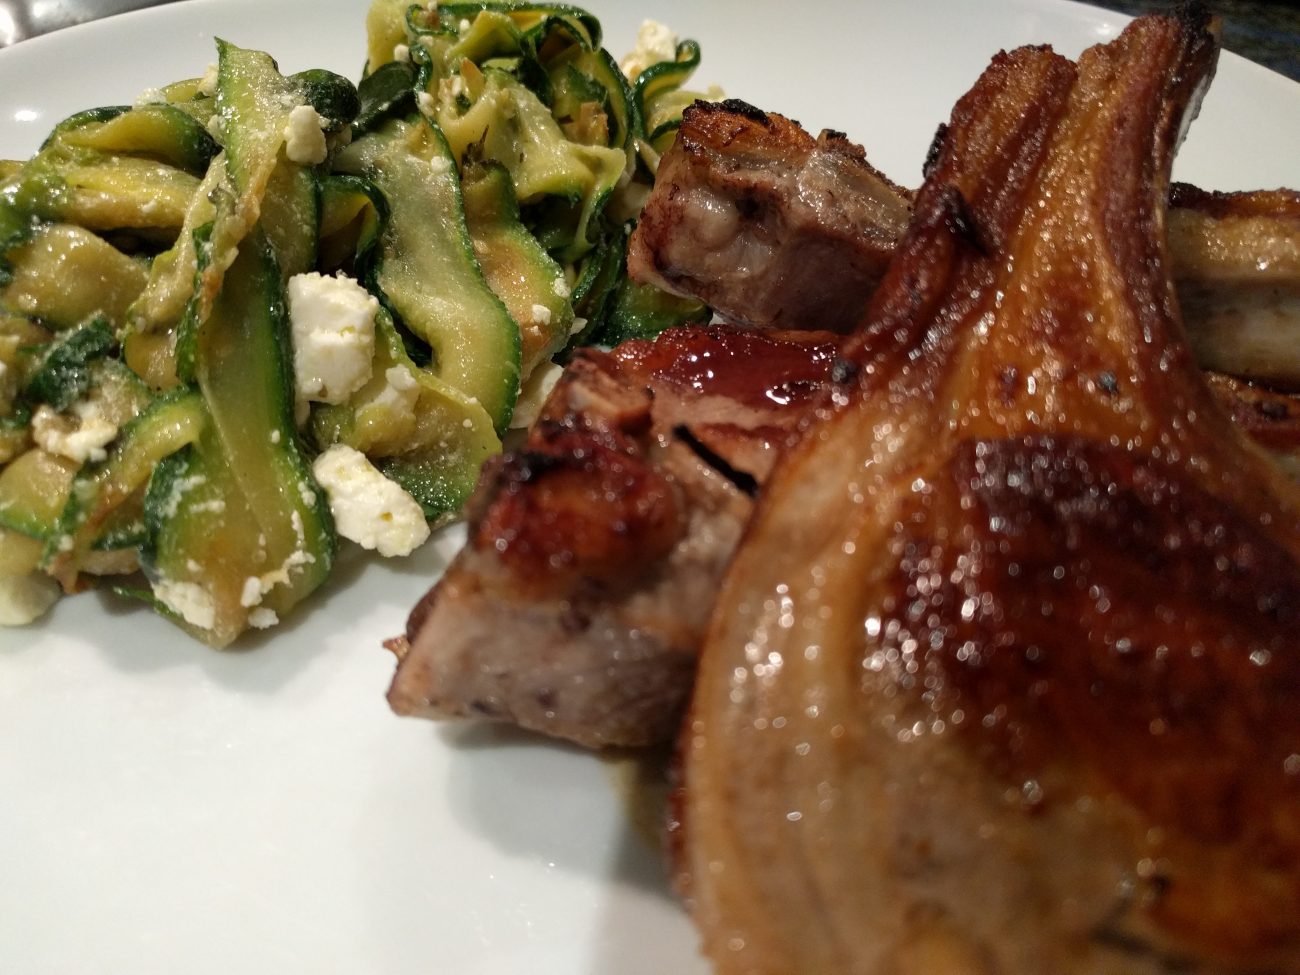 Barbecued lamb with Zucchini, mint and feta salad